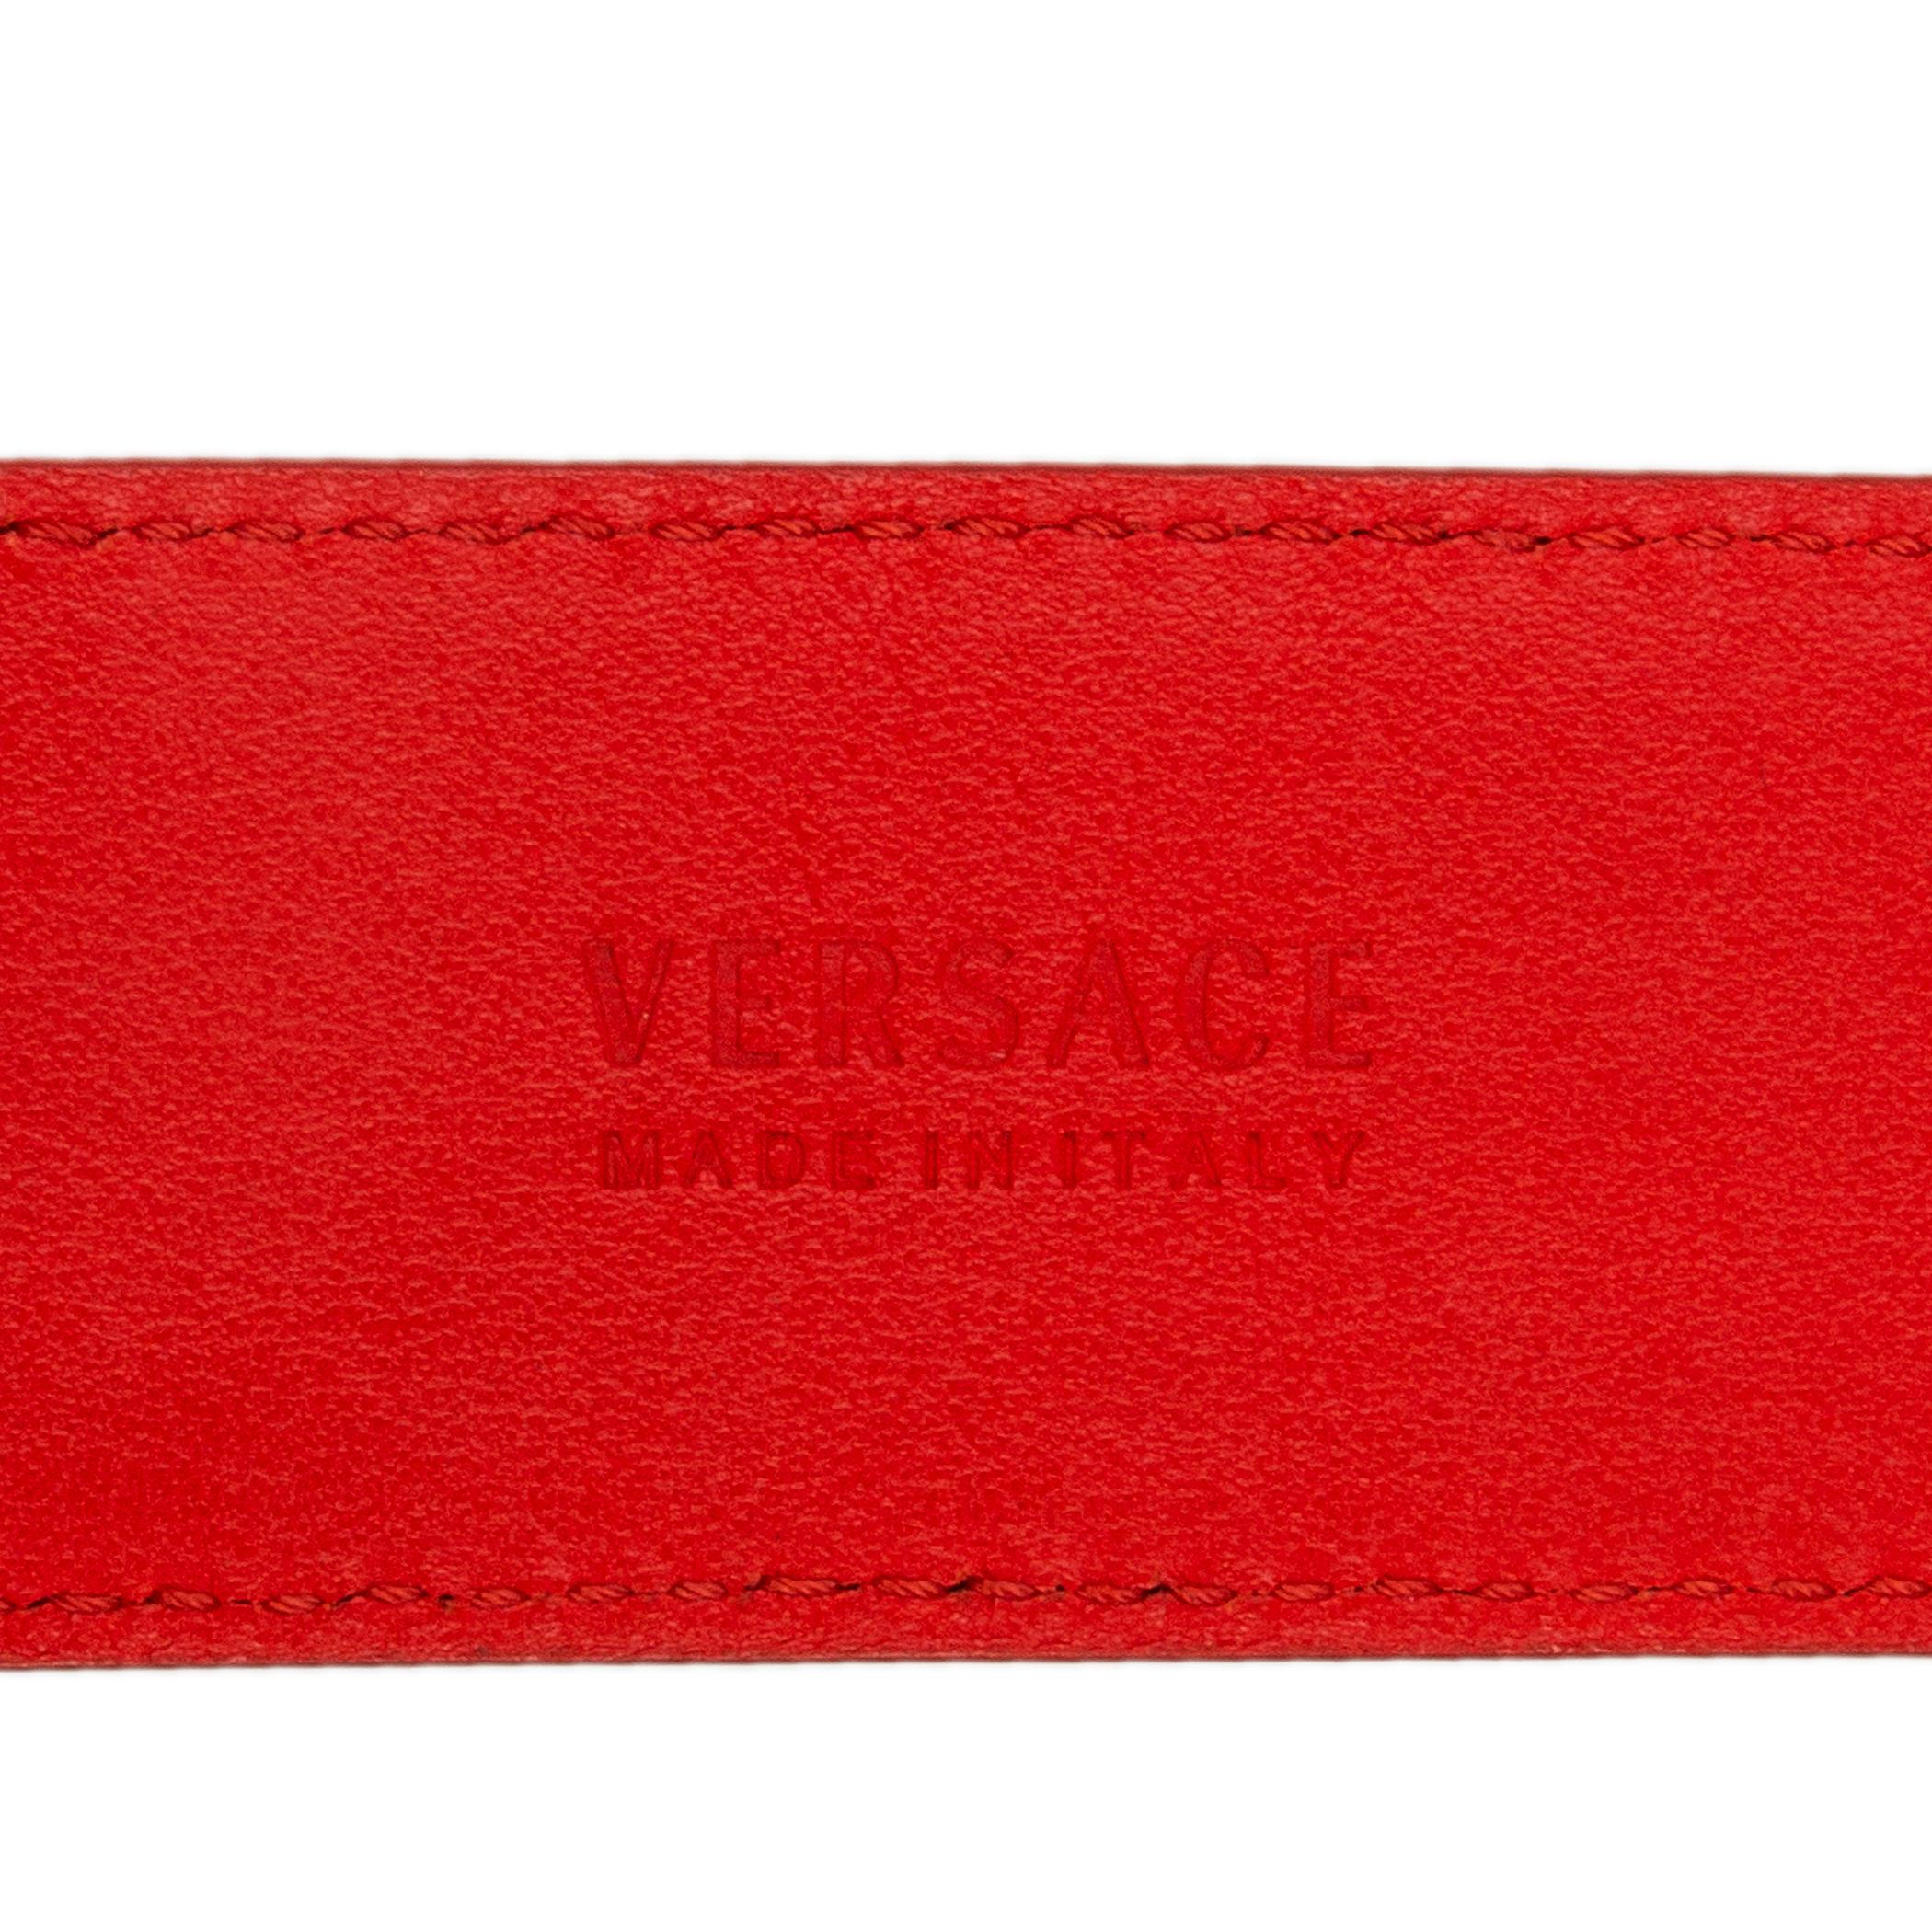 Women's VERSACE coral red leather & gold MEDUSA BUCKLE Belt 75